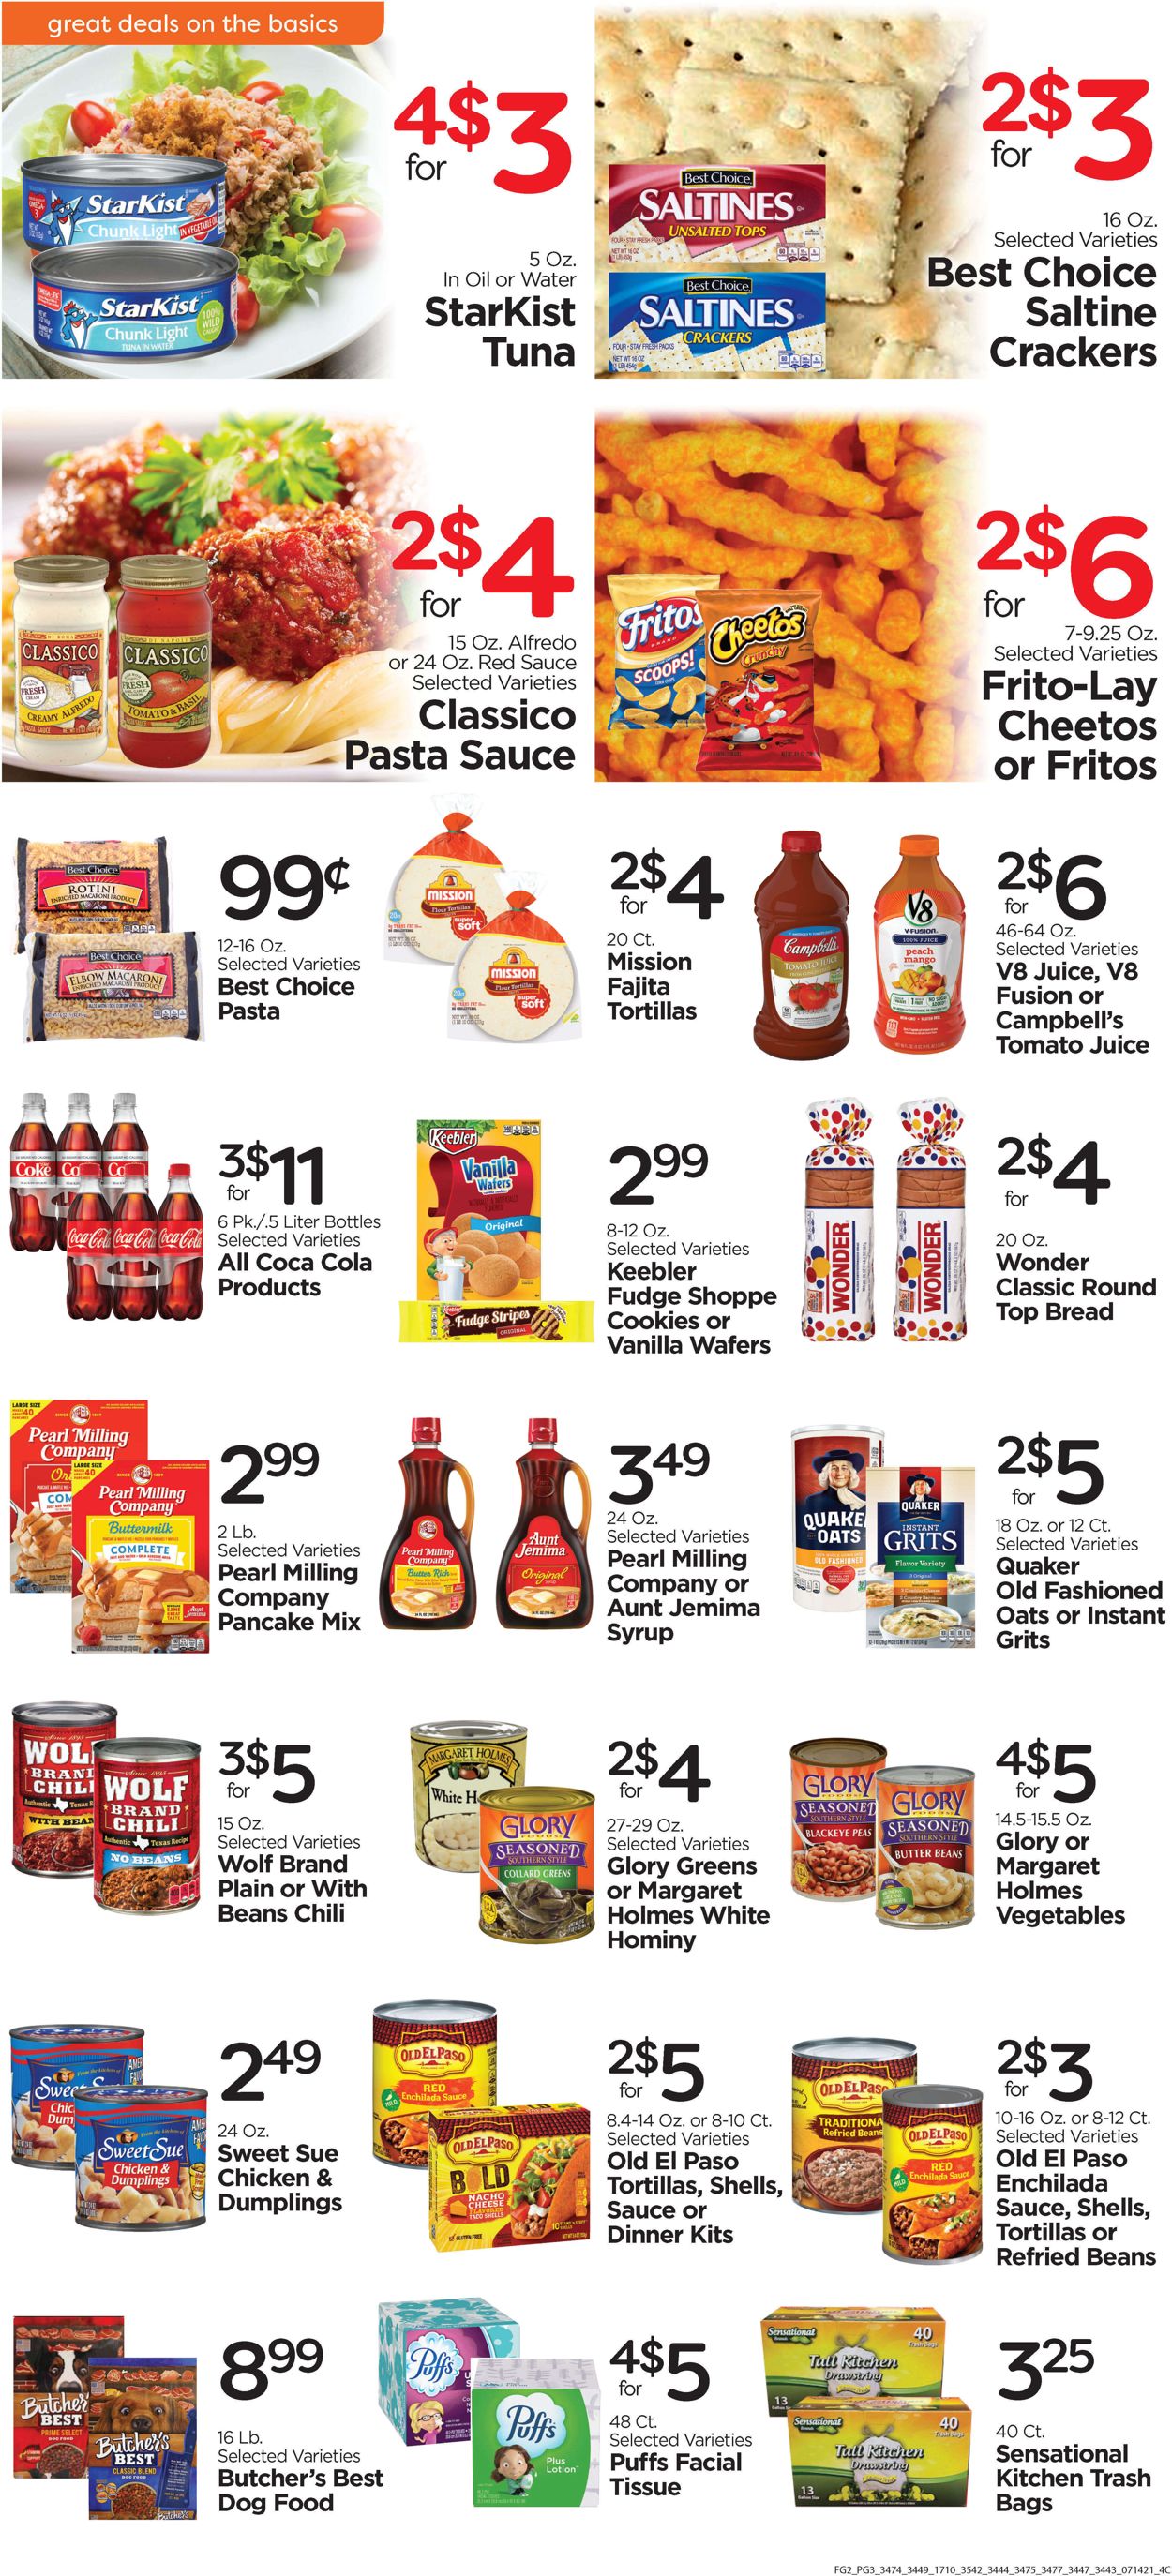 Catalogue Edwards Food Giant from 09/15/2021